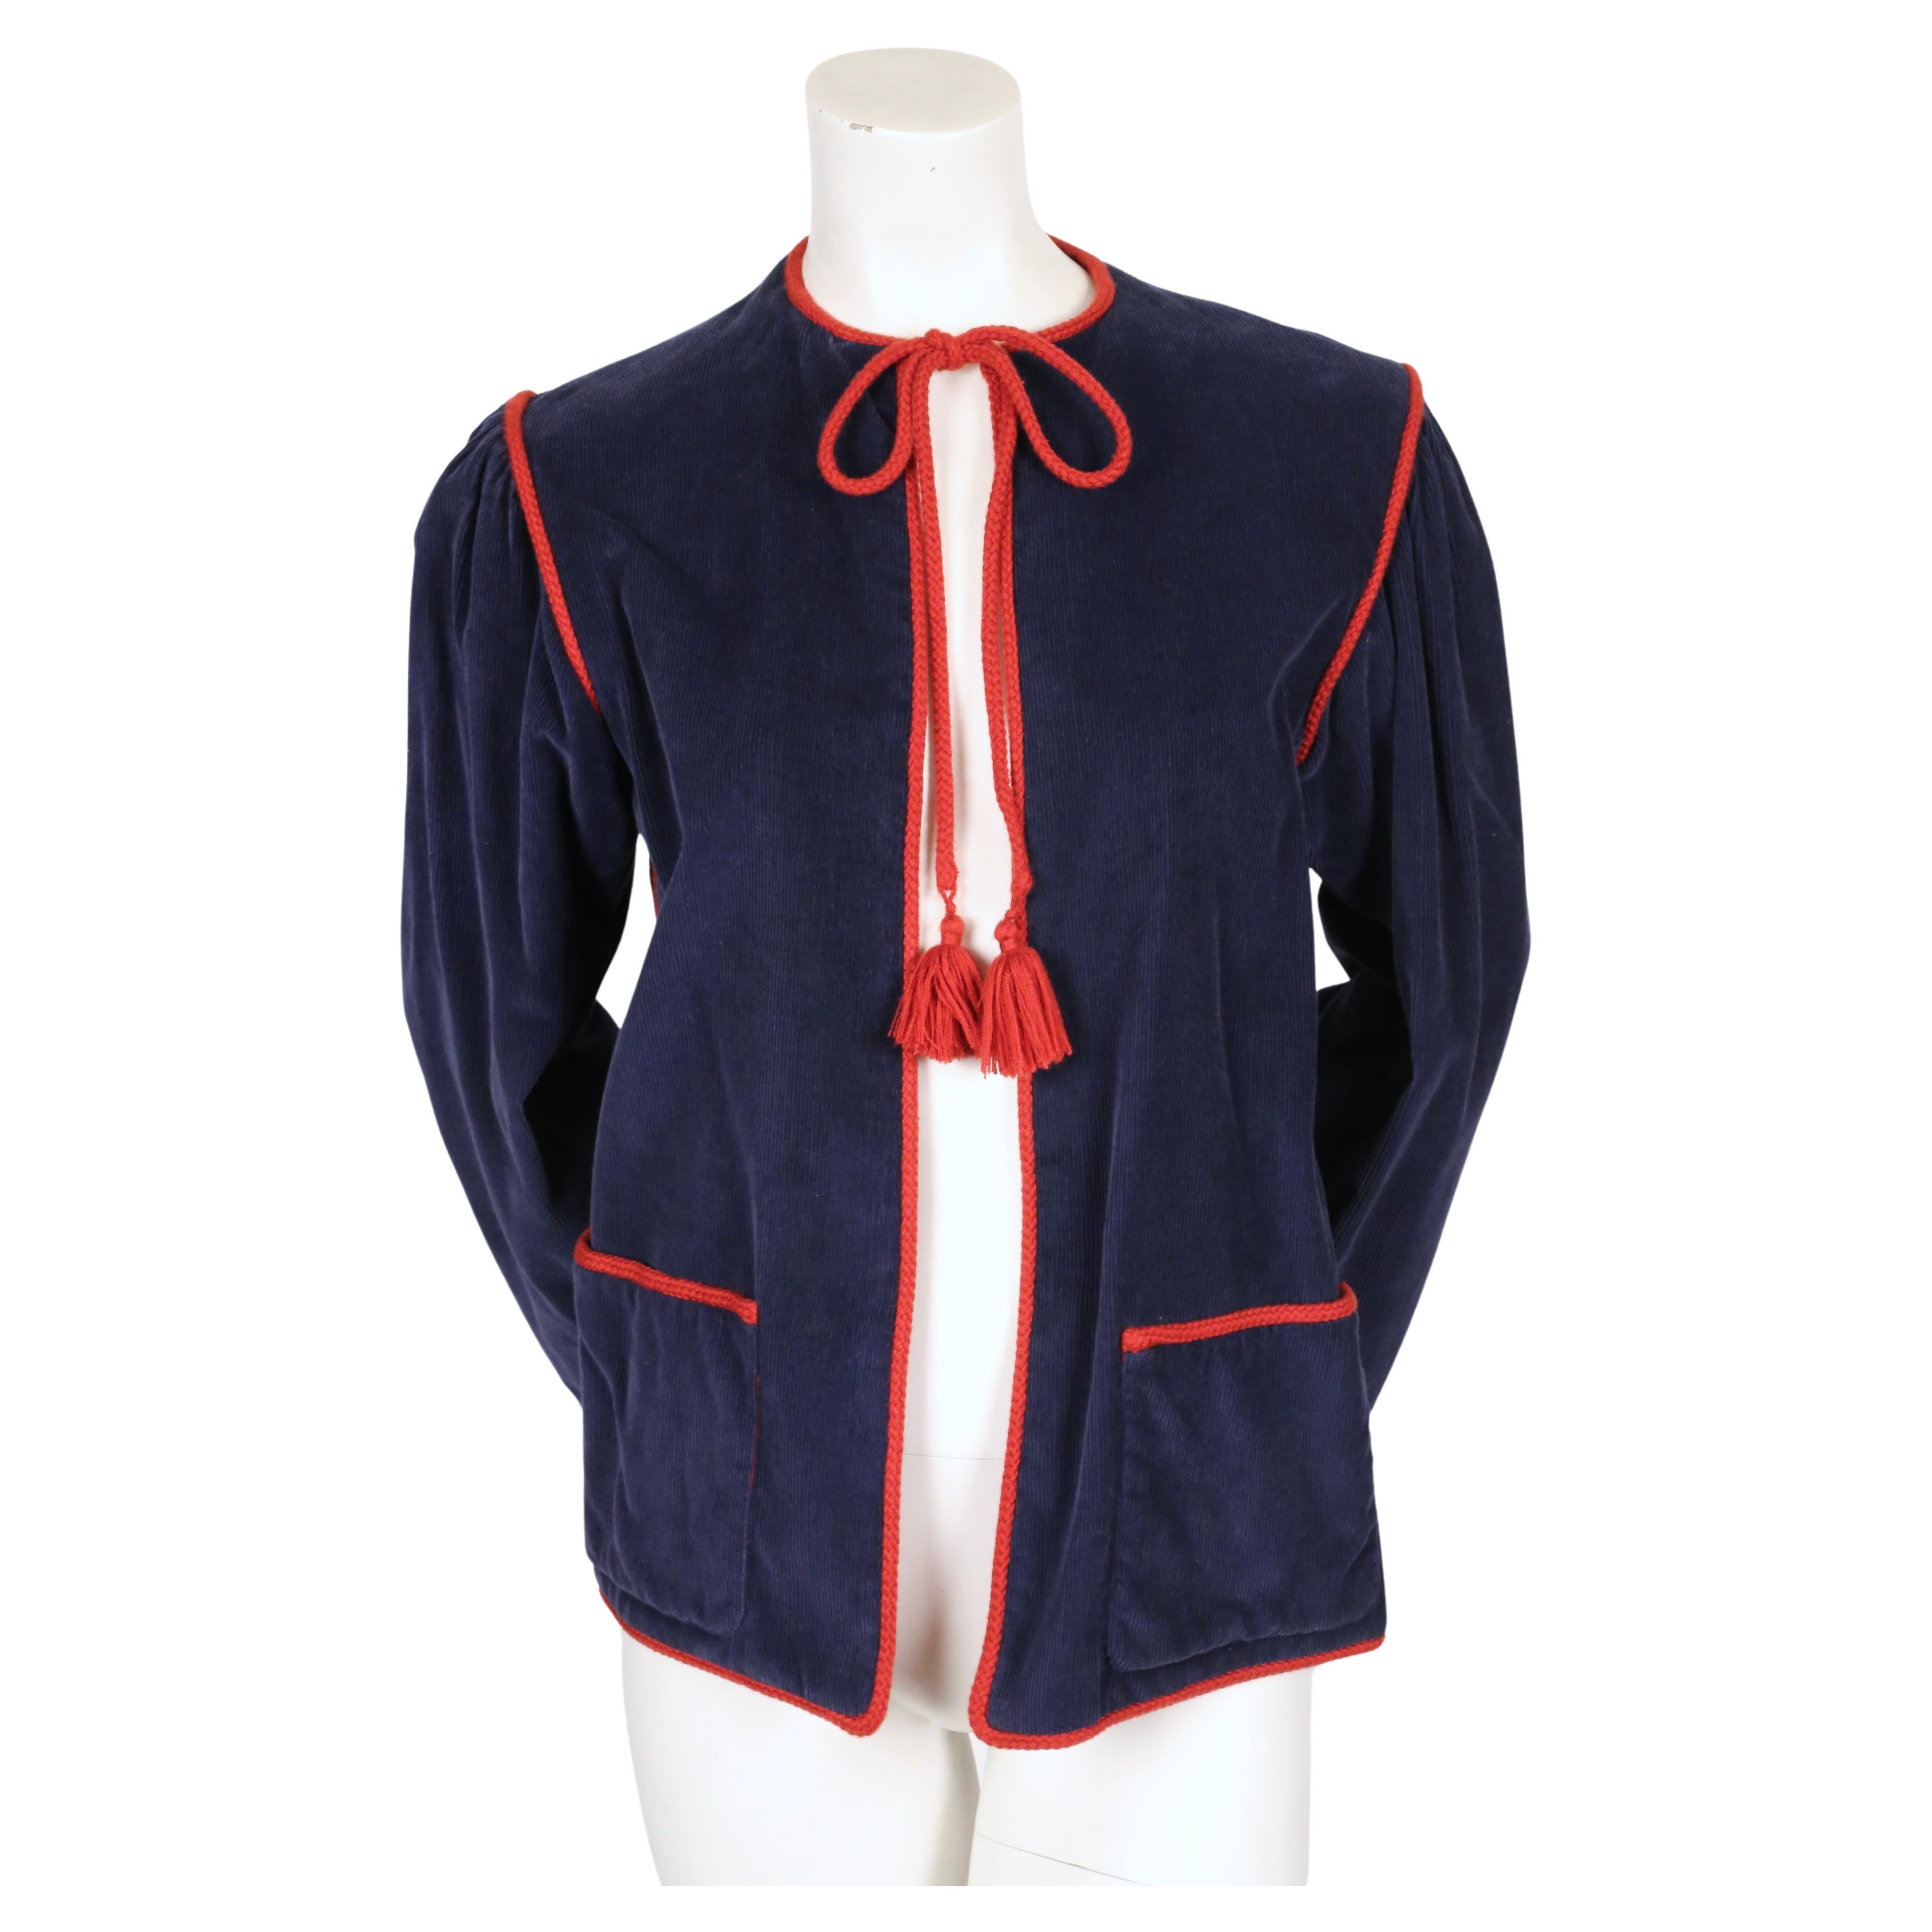 Blue, corduroy peasant jacket with deep red rope trim, tie closure and tassels designed by Yves Saint Laurent as seen on the spring 1977 runway. French size 40 however it best fits a size 2-6. Jacket was not clipped. Approximate measurements: